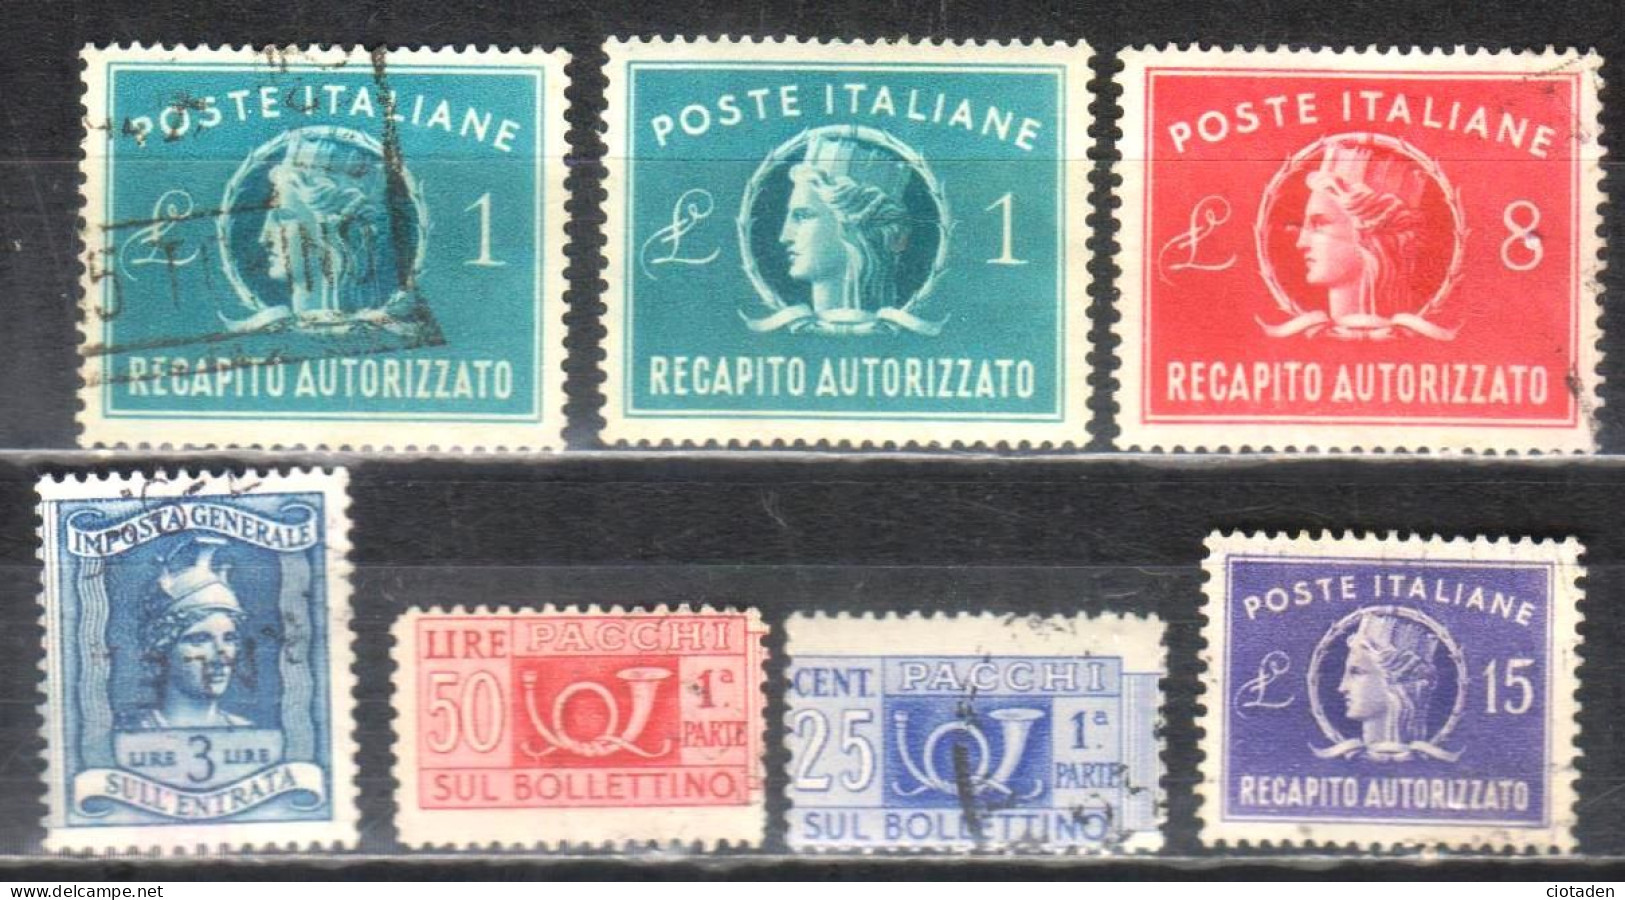 ITALIE - Timbres Fiscaux - Fiscali